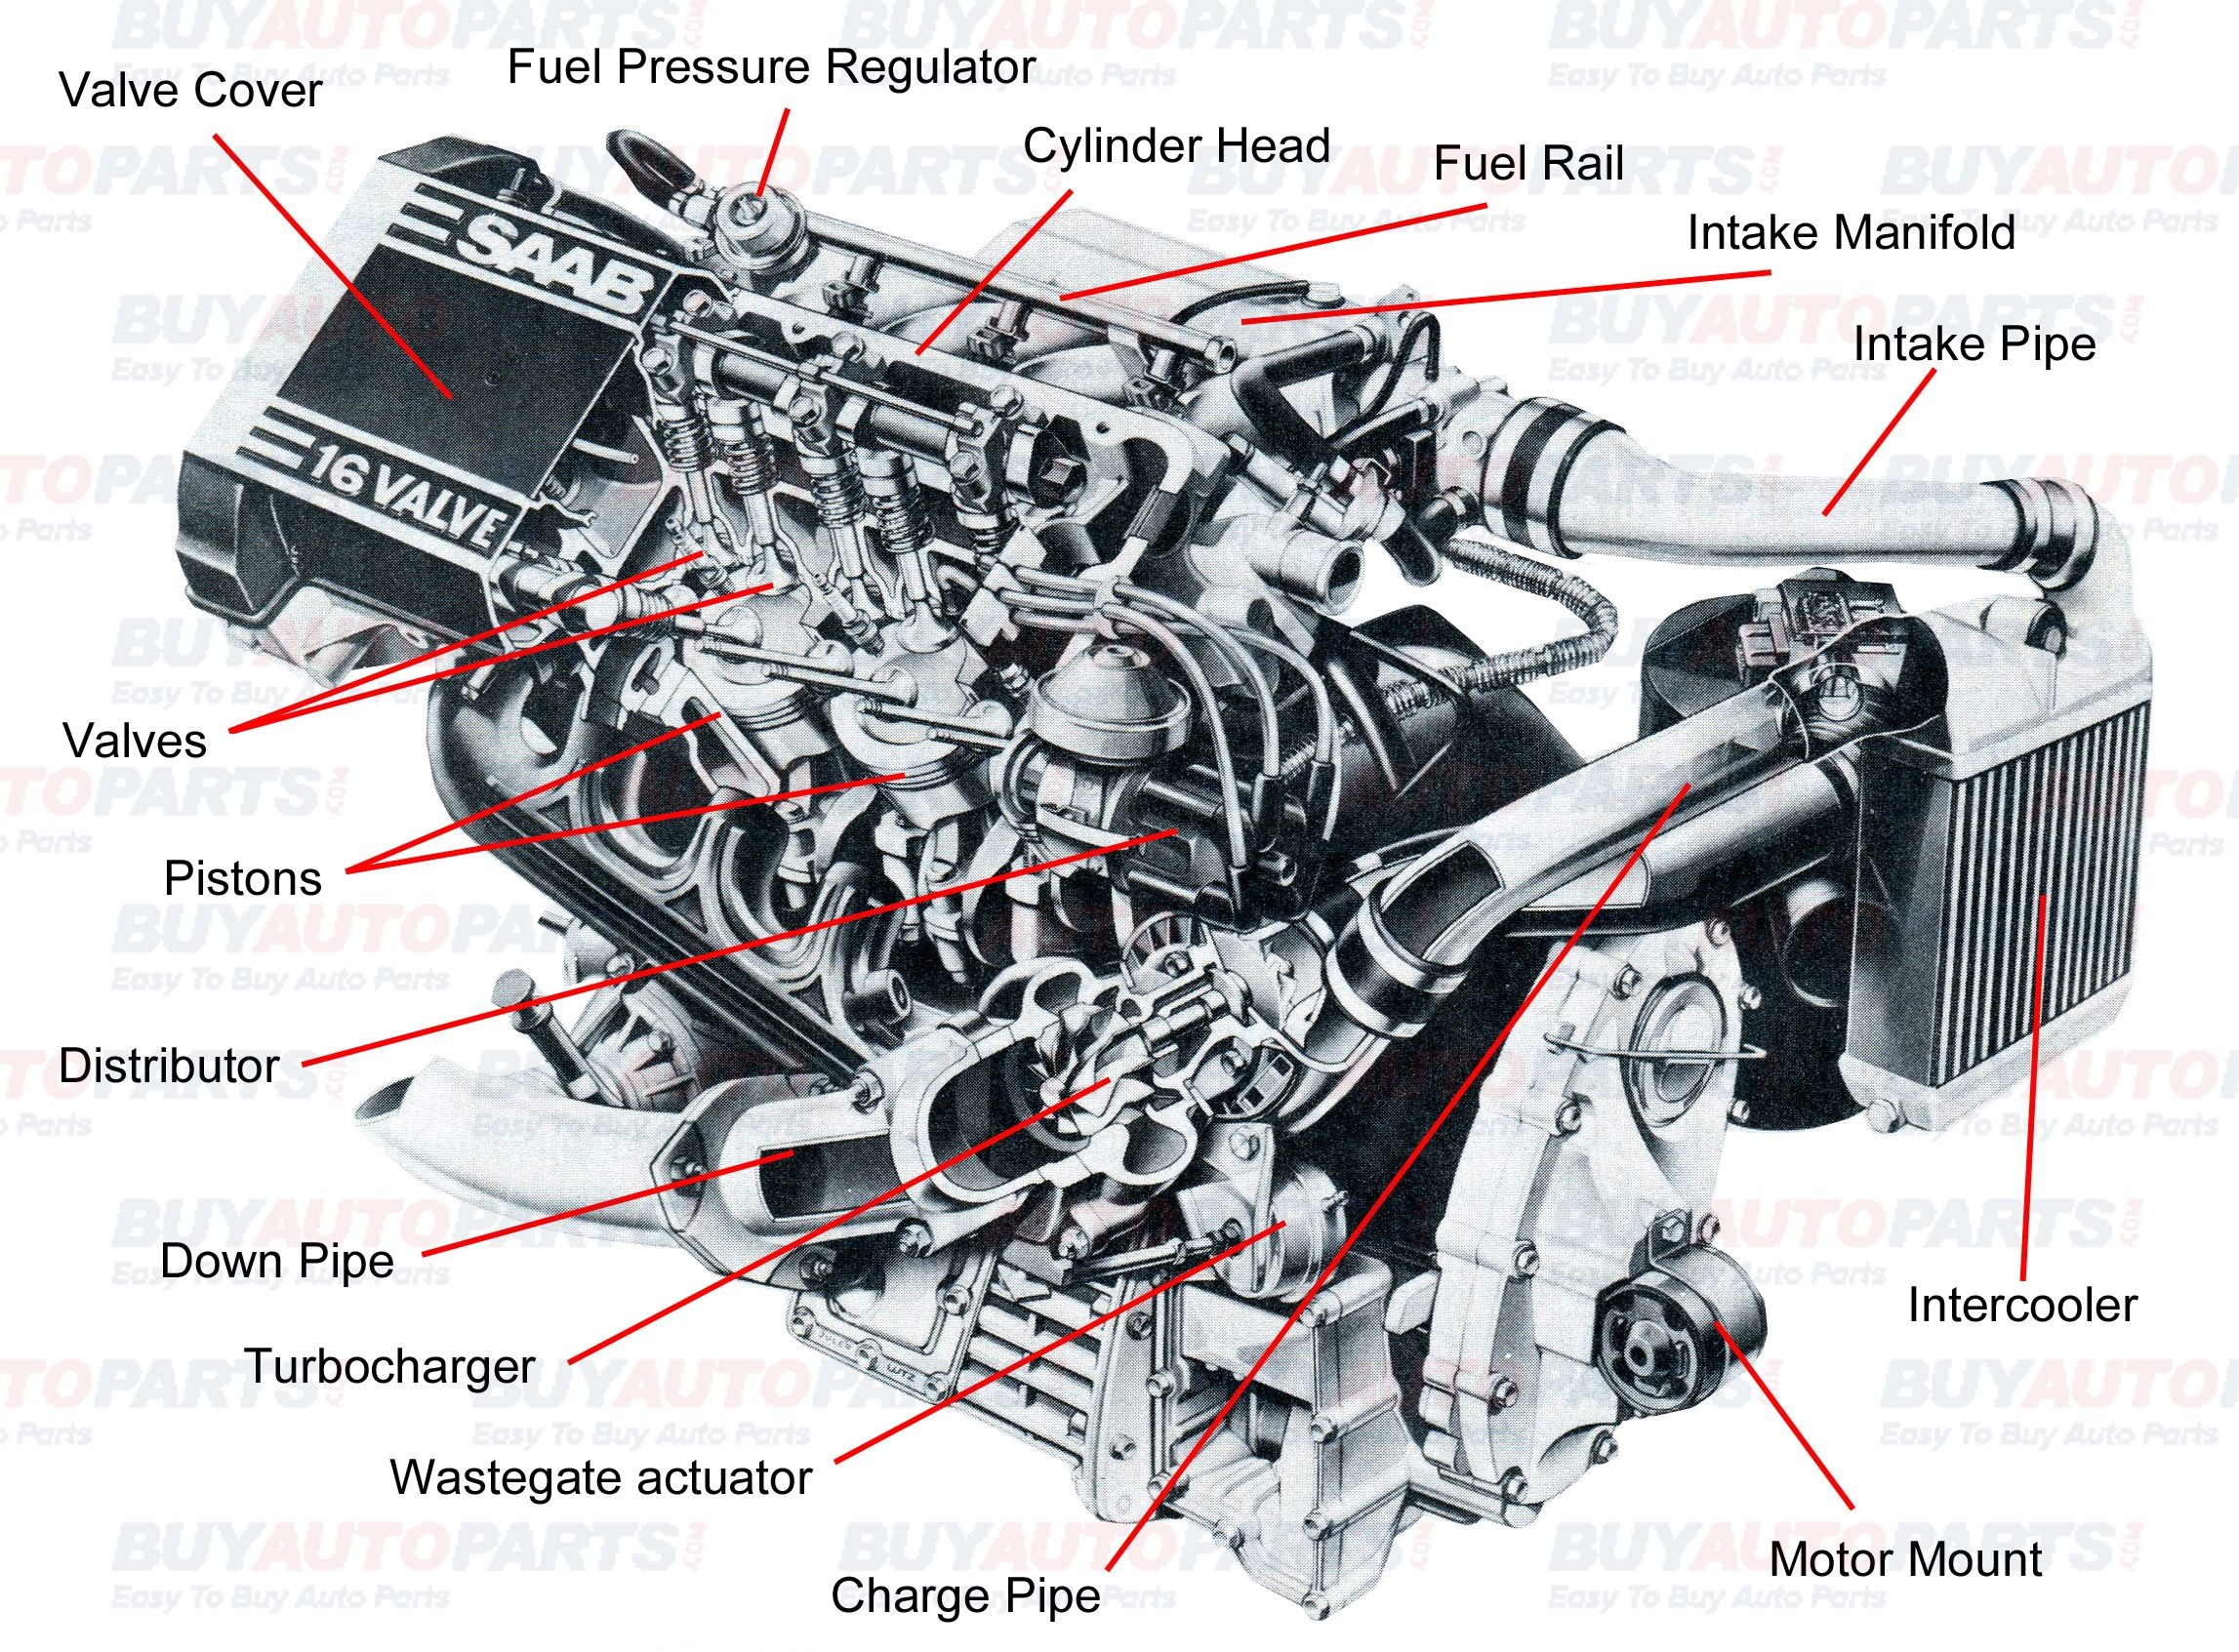 Car Clutch Diagram Pin by Jimmiejanet Testellamwfz On What Does An Engine with Turbo Of Car Clutch Diagram